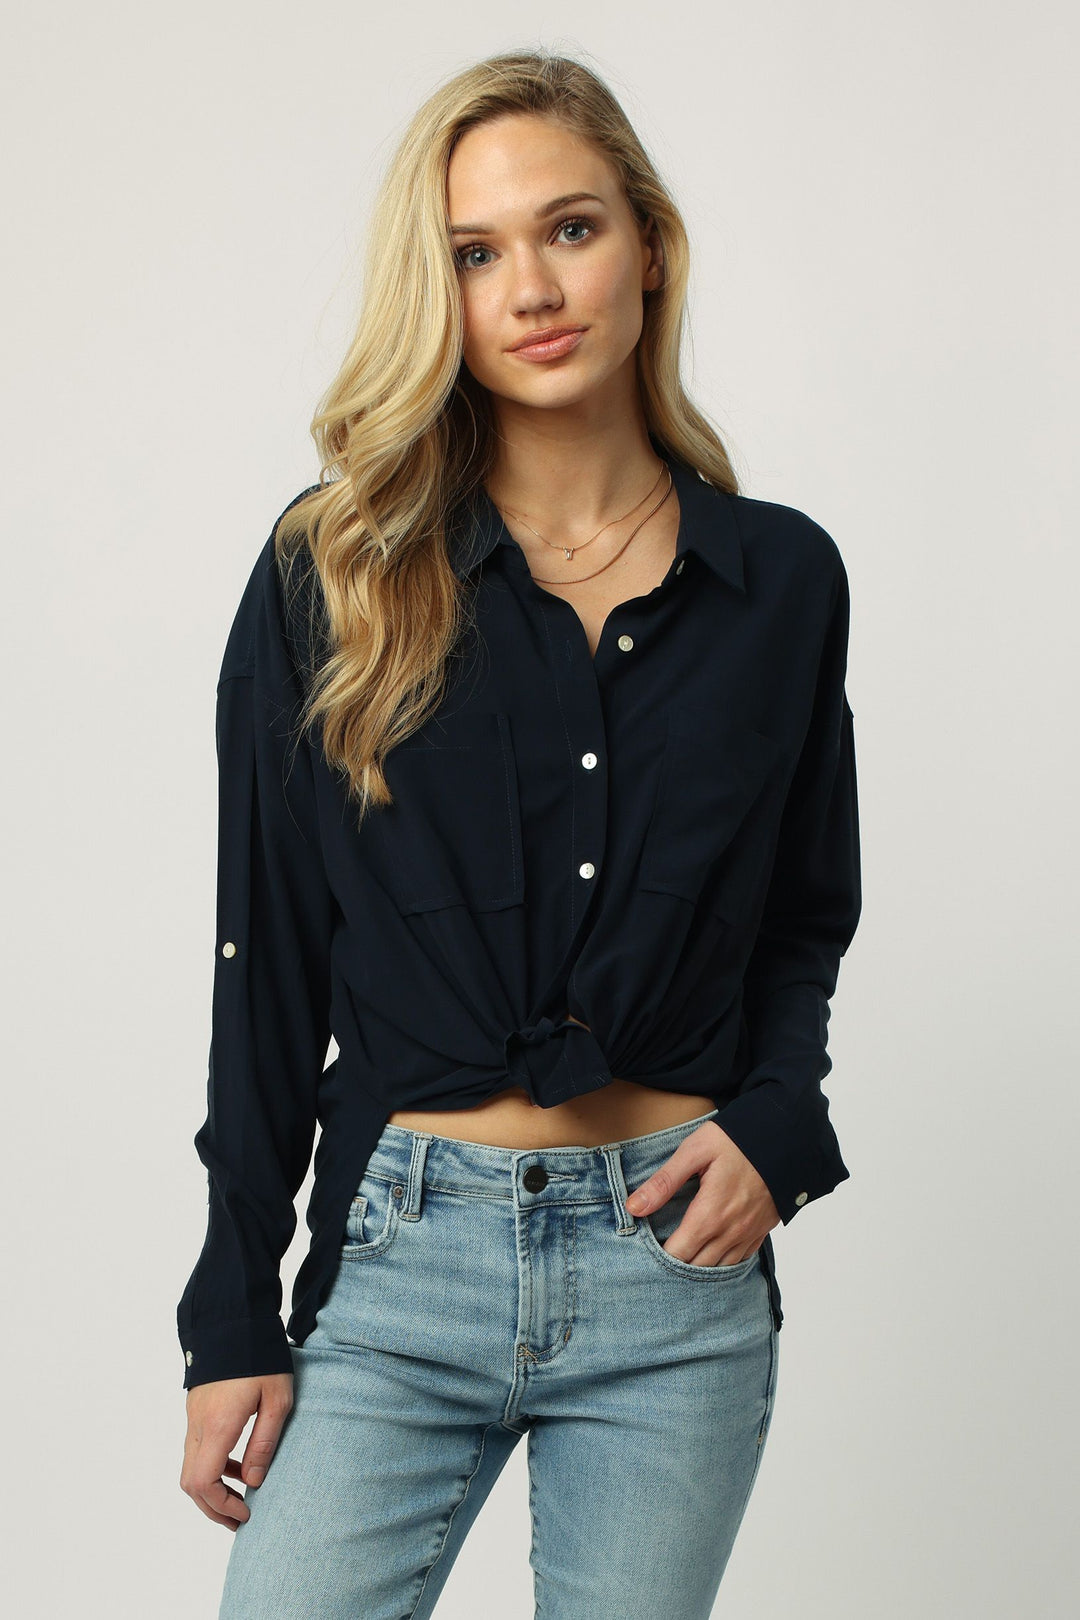 NIGHT SKY ARIANNA TIED BUTTON FRONT SHIRT - Kingfisher Road - Online Boutique